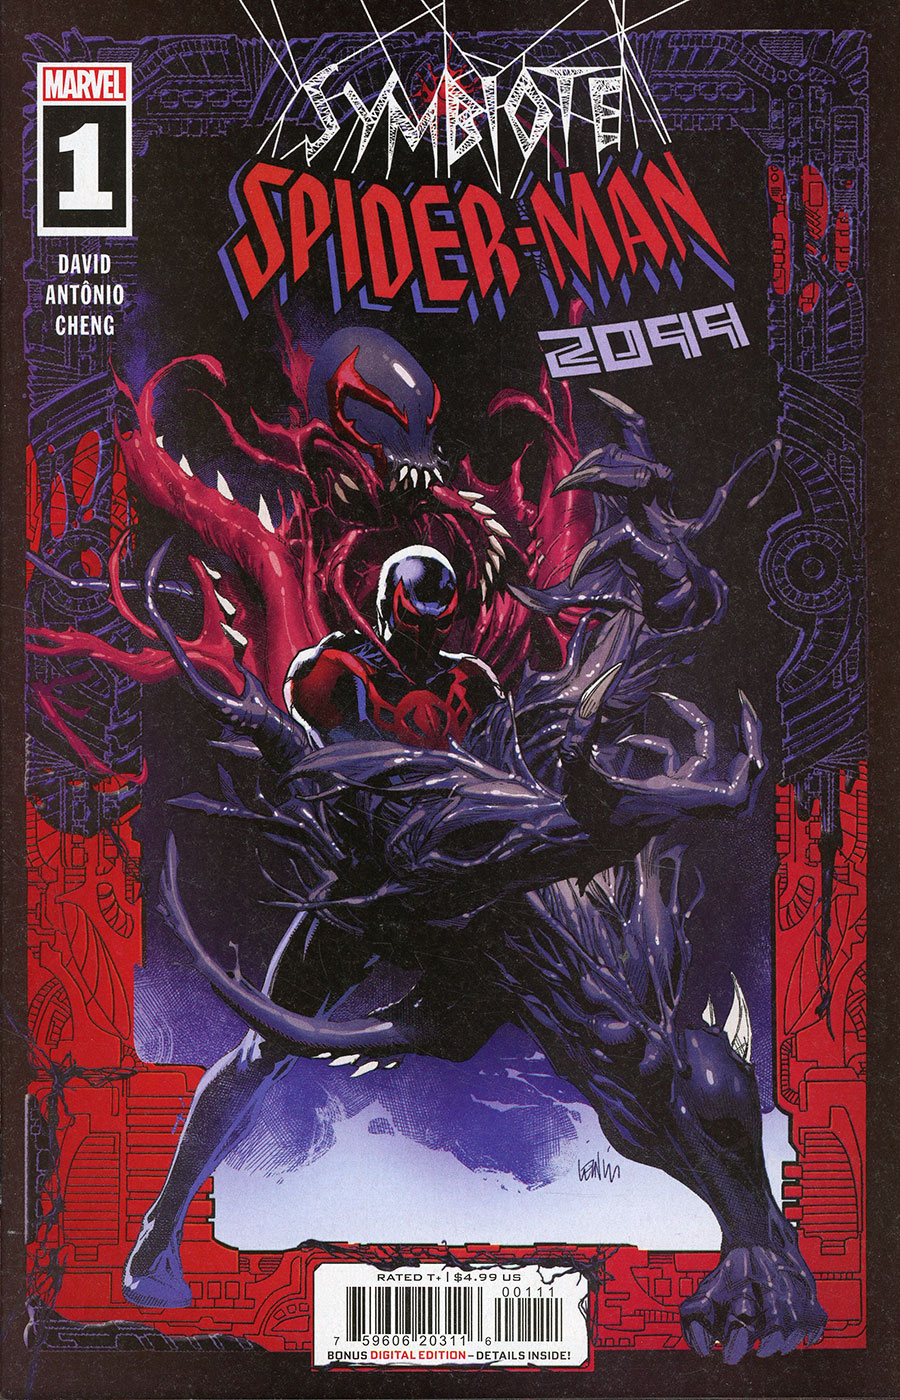 Symbiote Spider-Man 2099 #1 Cover A Regular Leinil Francis Yu Cover